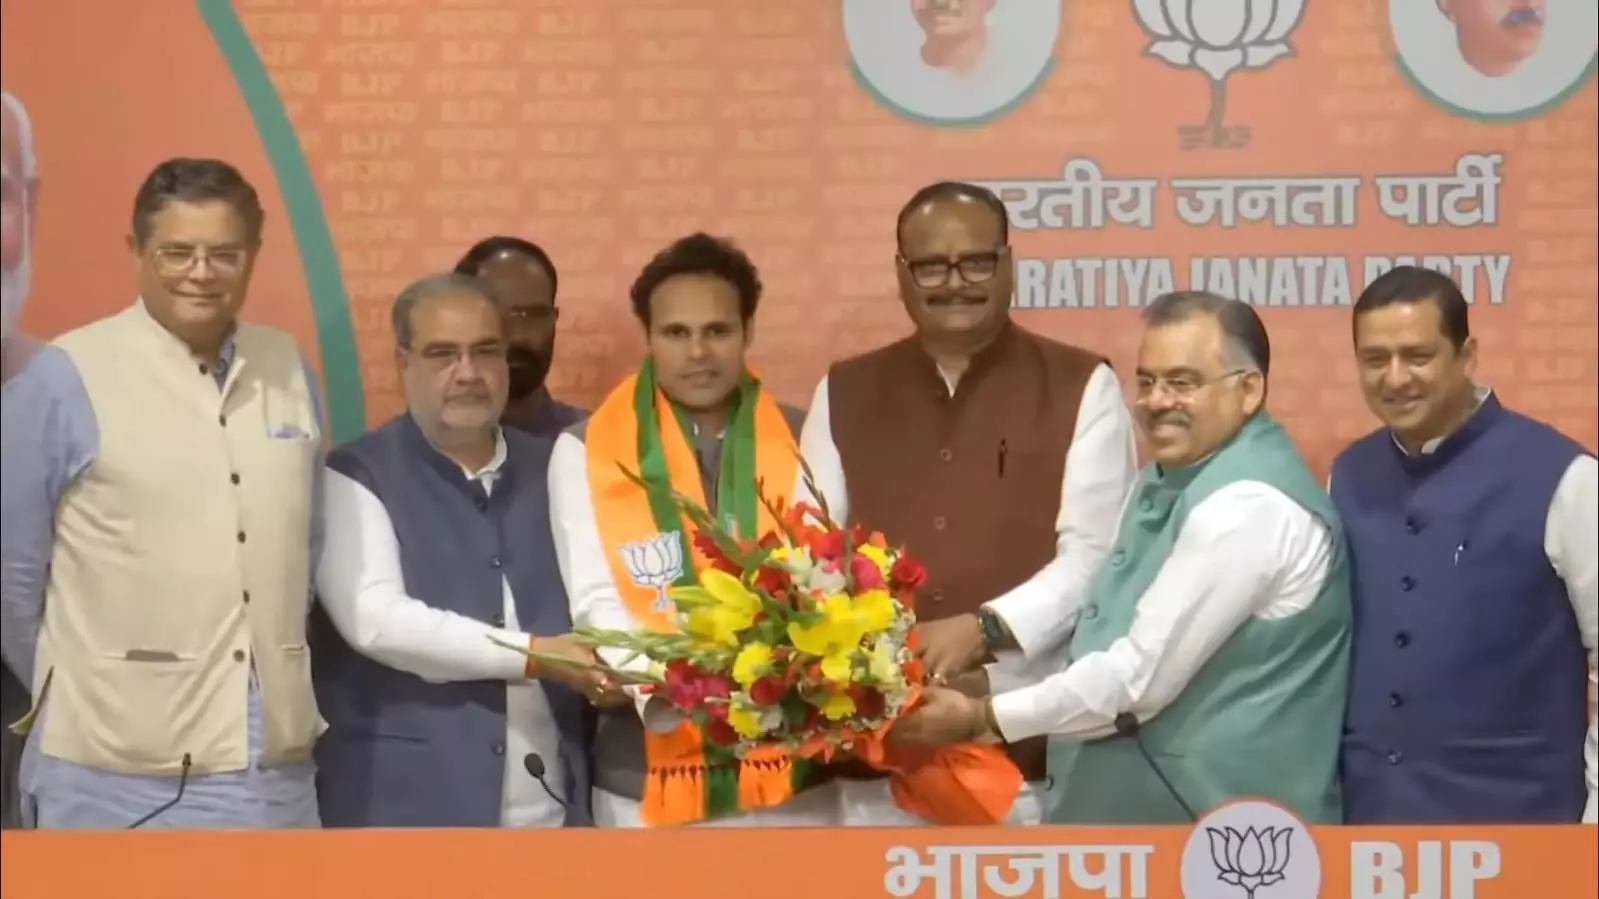 BSP MP Ritesh Pandey resigns from party, joins BJP ahead of LS polls